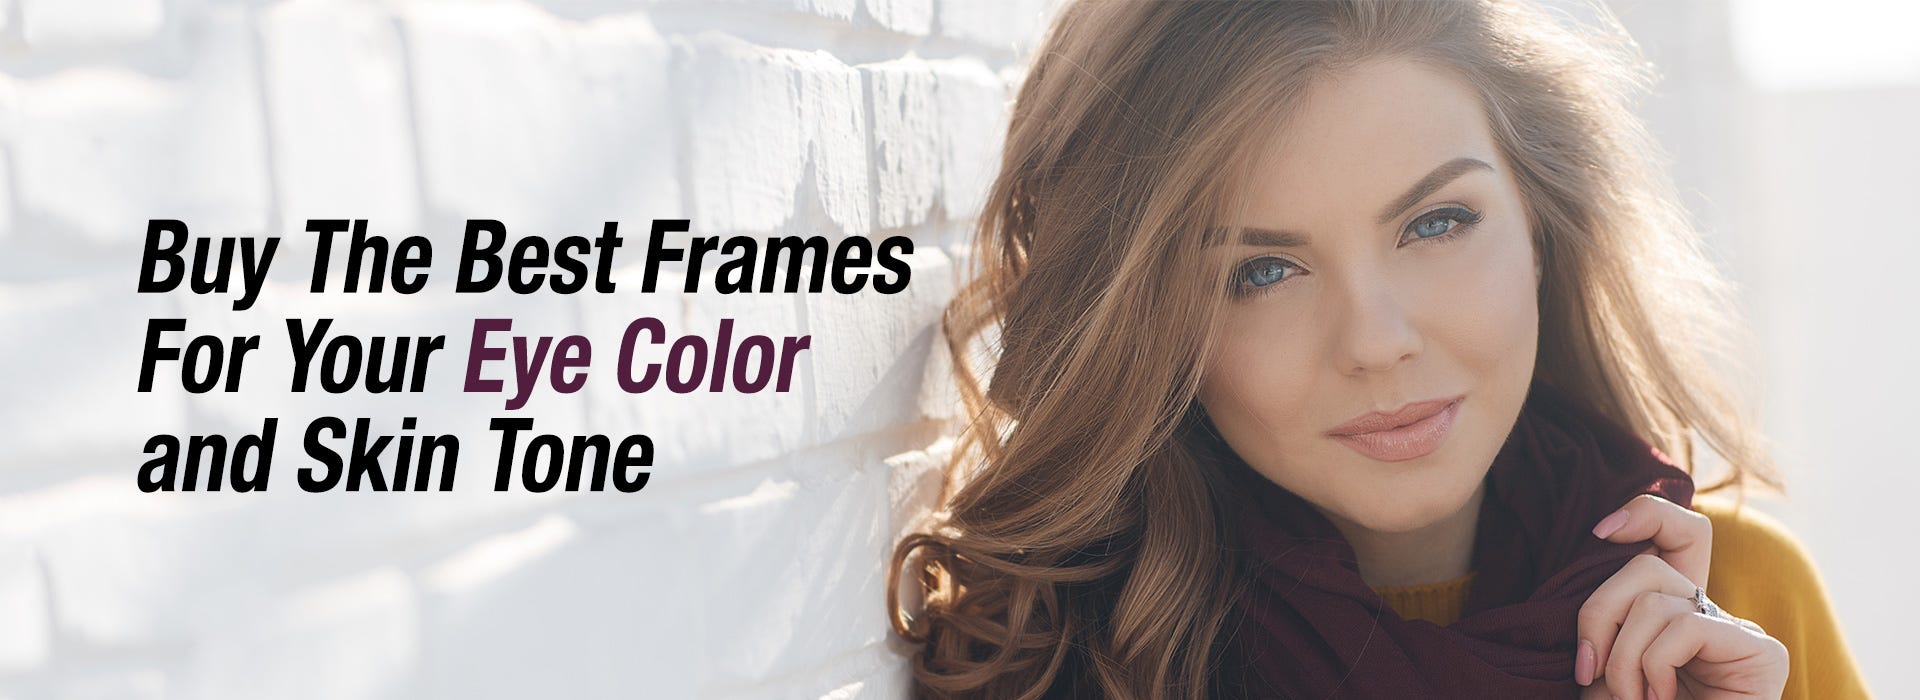 Buy The Best Frames For Your Eye Color and Skin Tone